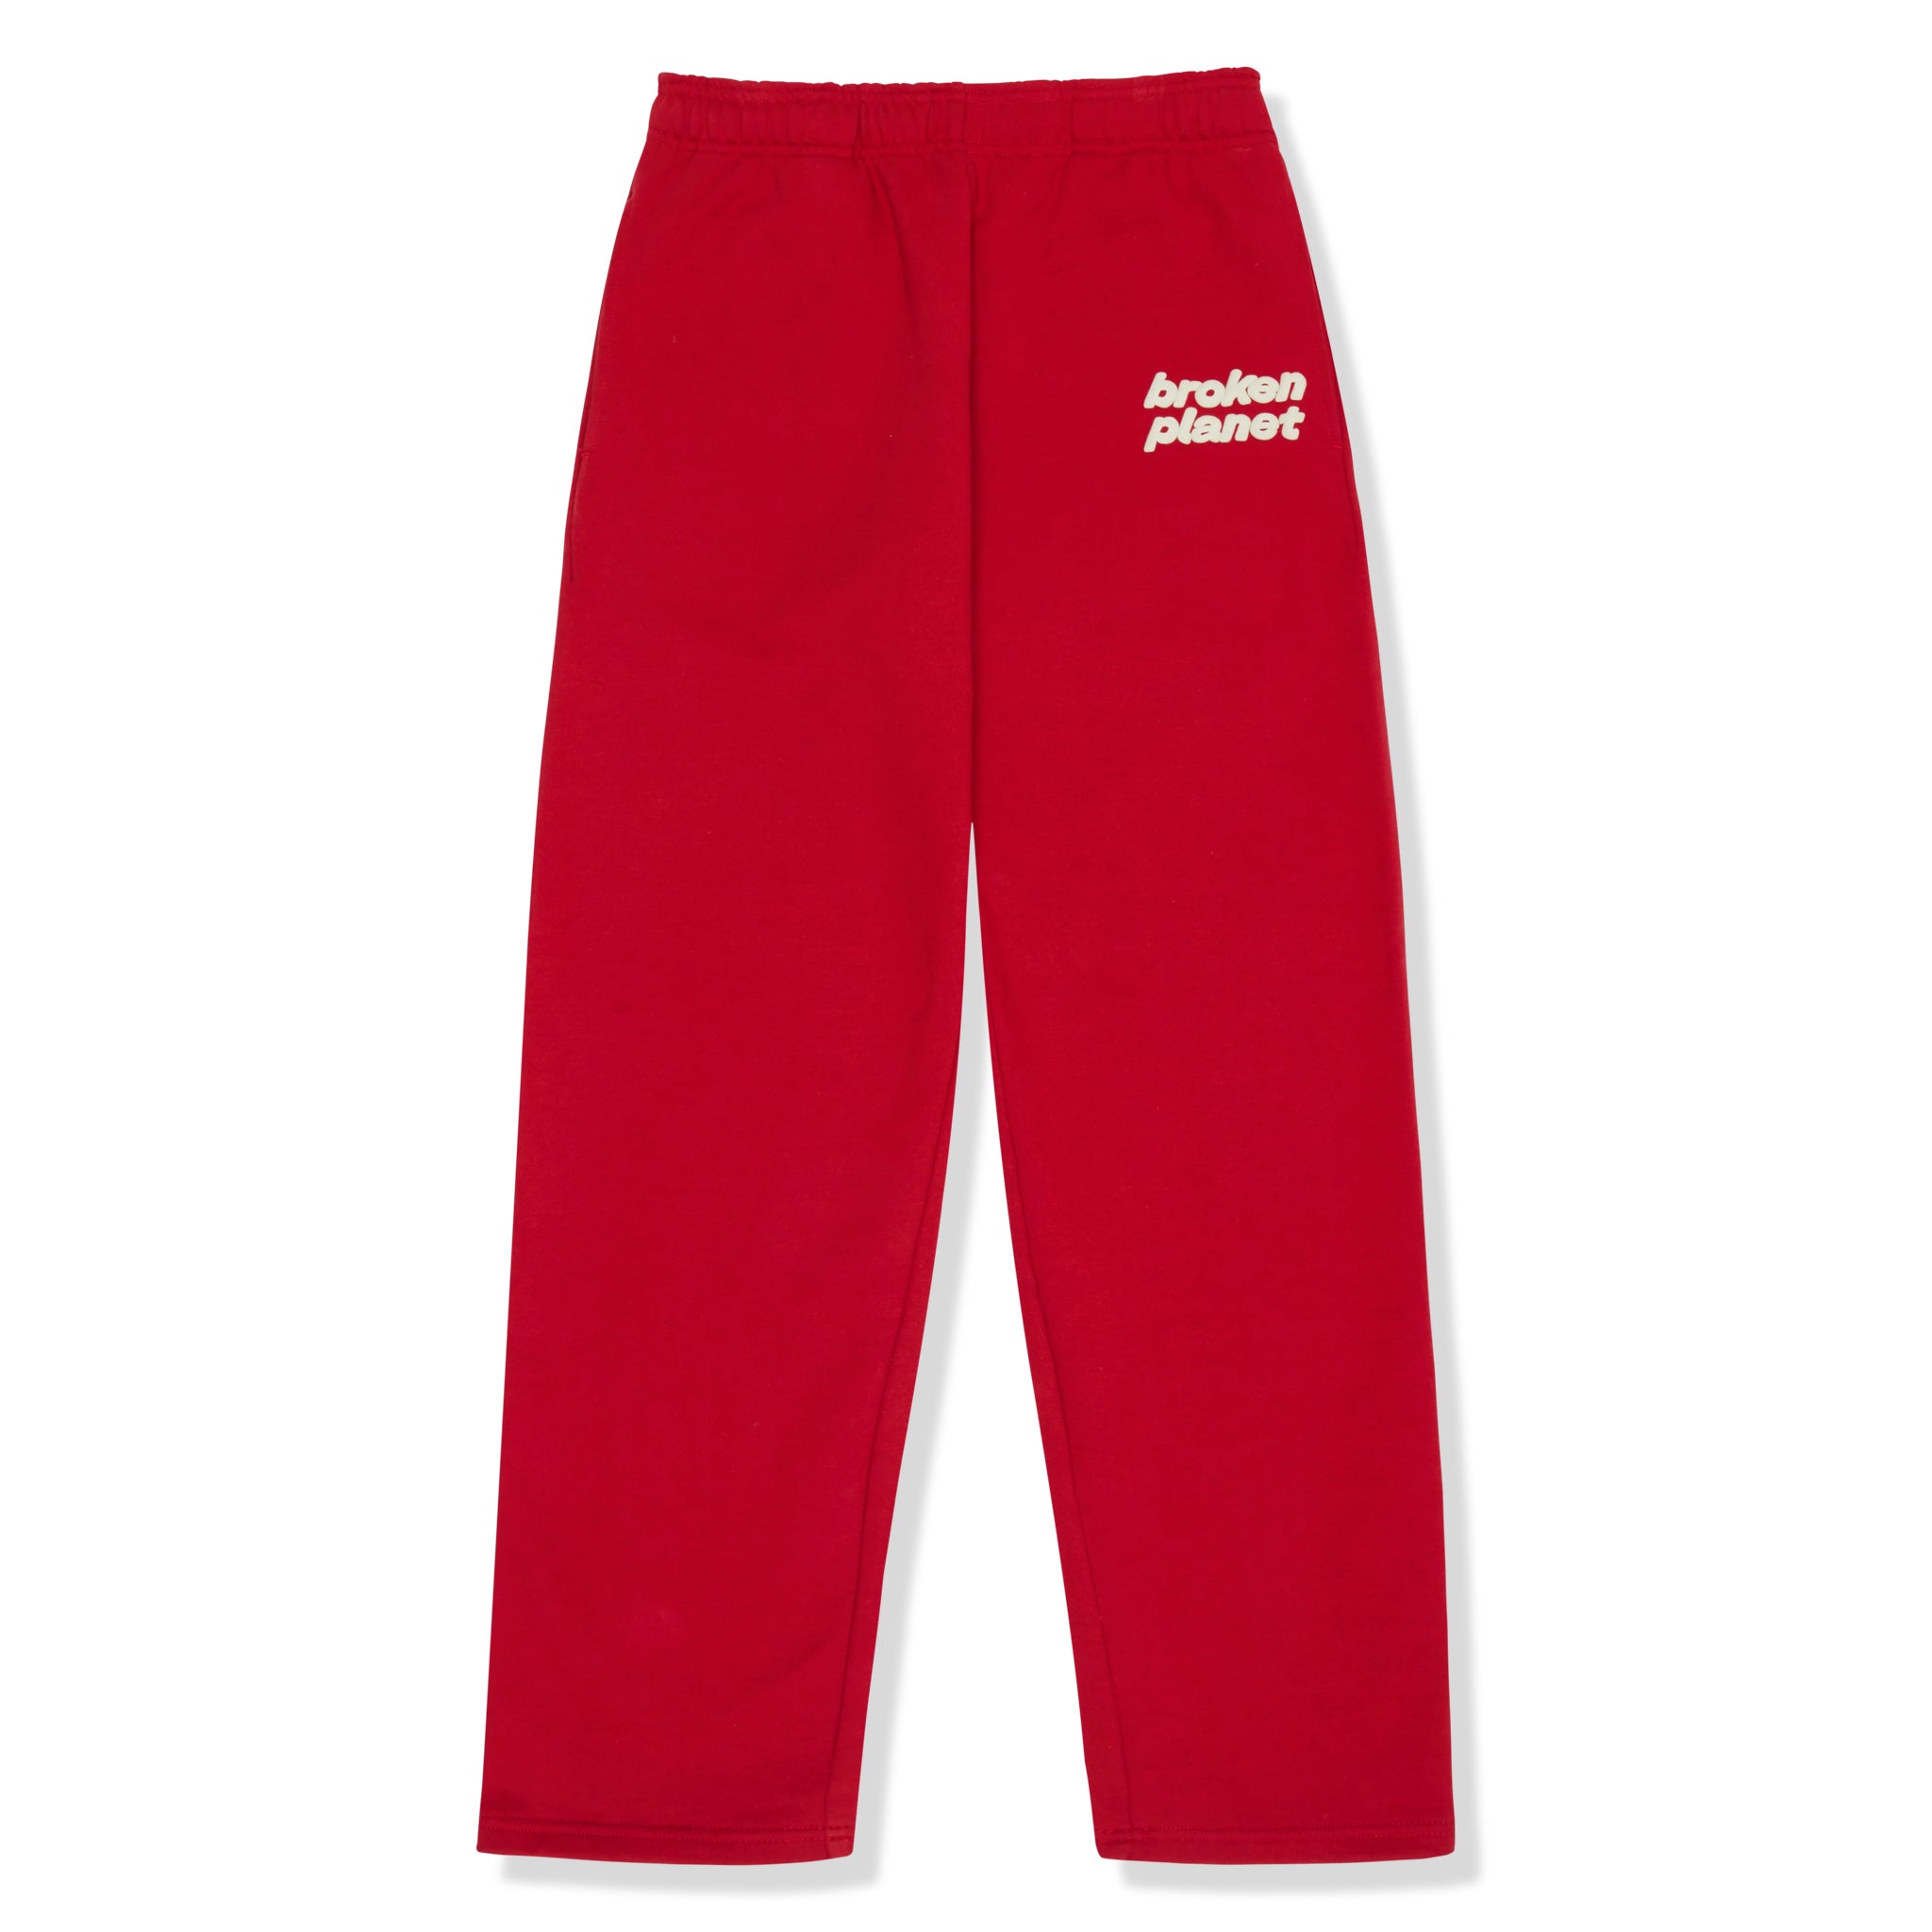 Front view of Broken Planet Straight Leg Sweatpants Ruby Red 